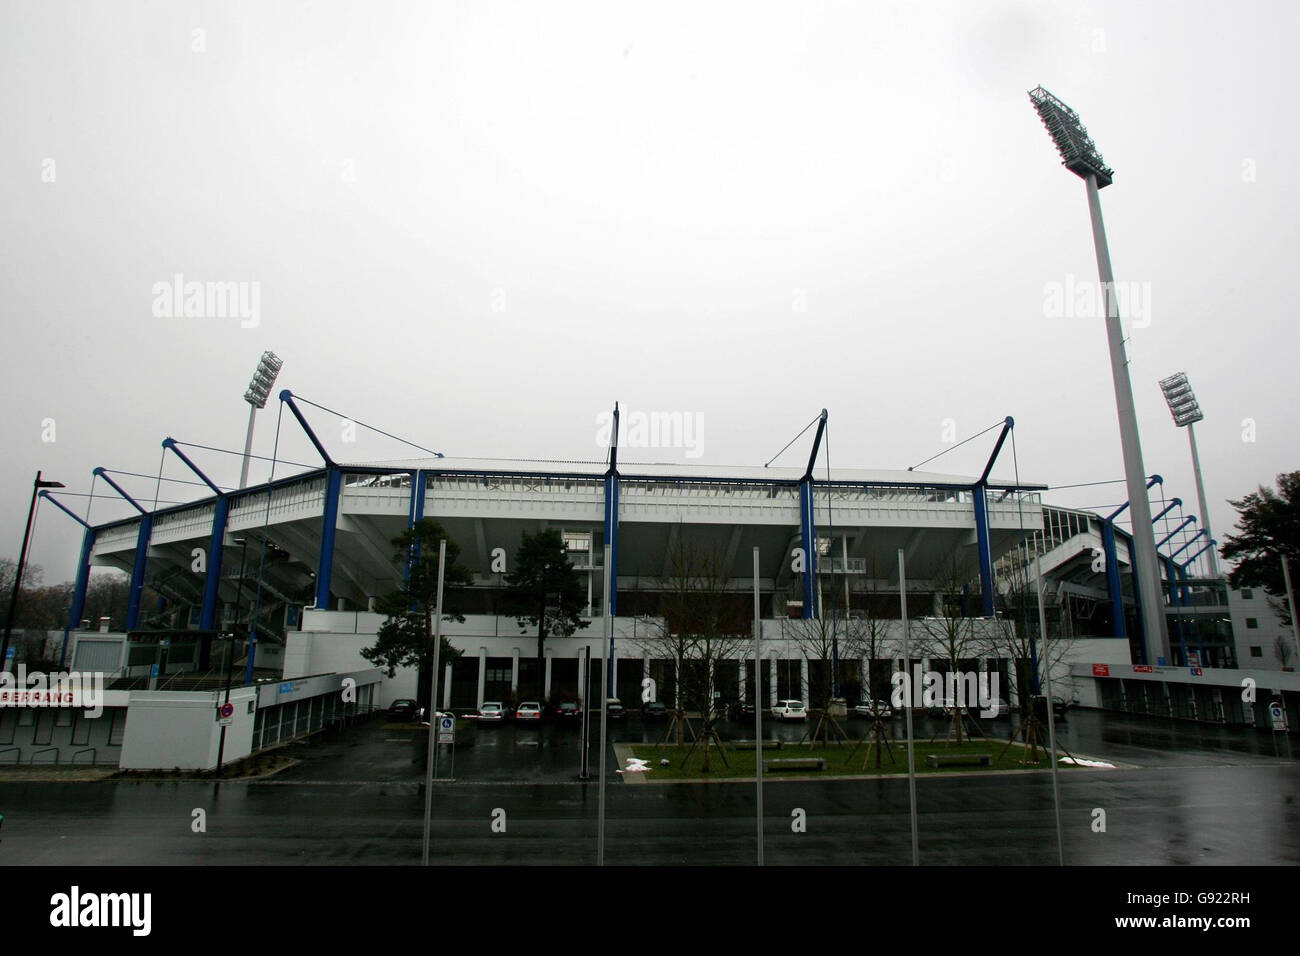 General view photo dated 06/12/2005 showing the outside of Frankenstadion in Nuremburg, Germany. The stadium will feature as a venue for the 2006 World Cup. PRESS ASSOCIATION Photo. Photo credit should read: Nick Potts/PA. Stock Photo